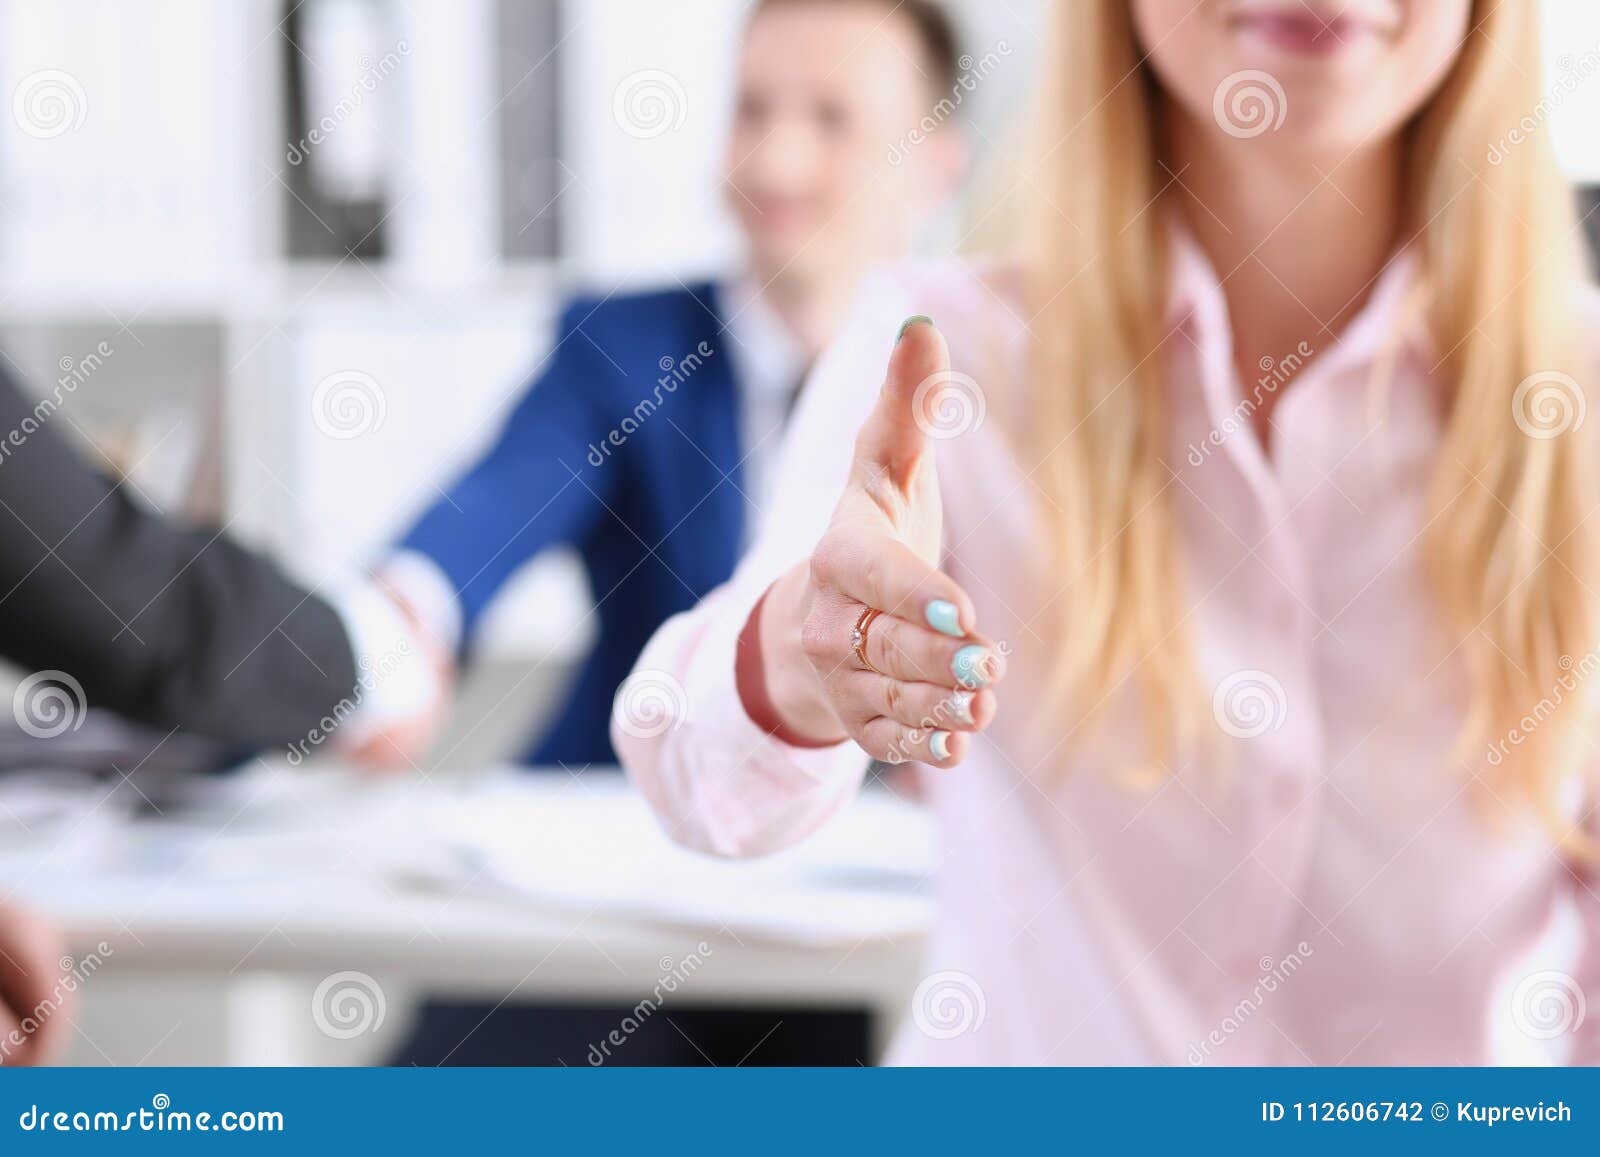 Businesswoman Offer Hand To Shake As Hello Stock Photo - Image of ...